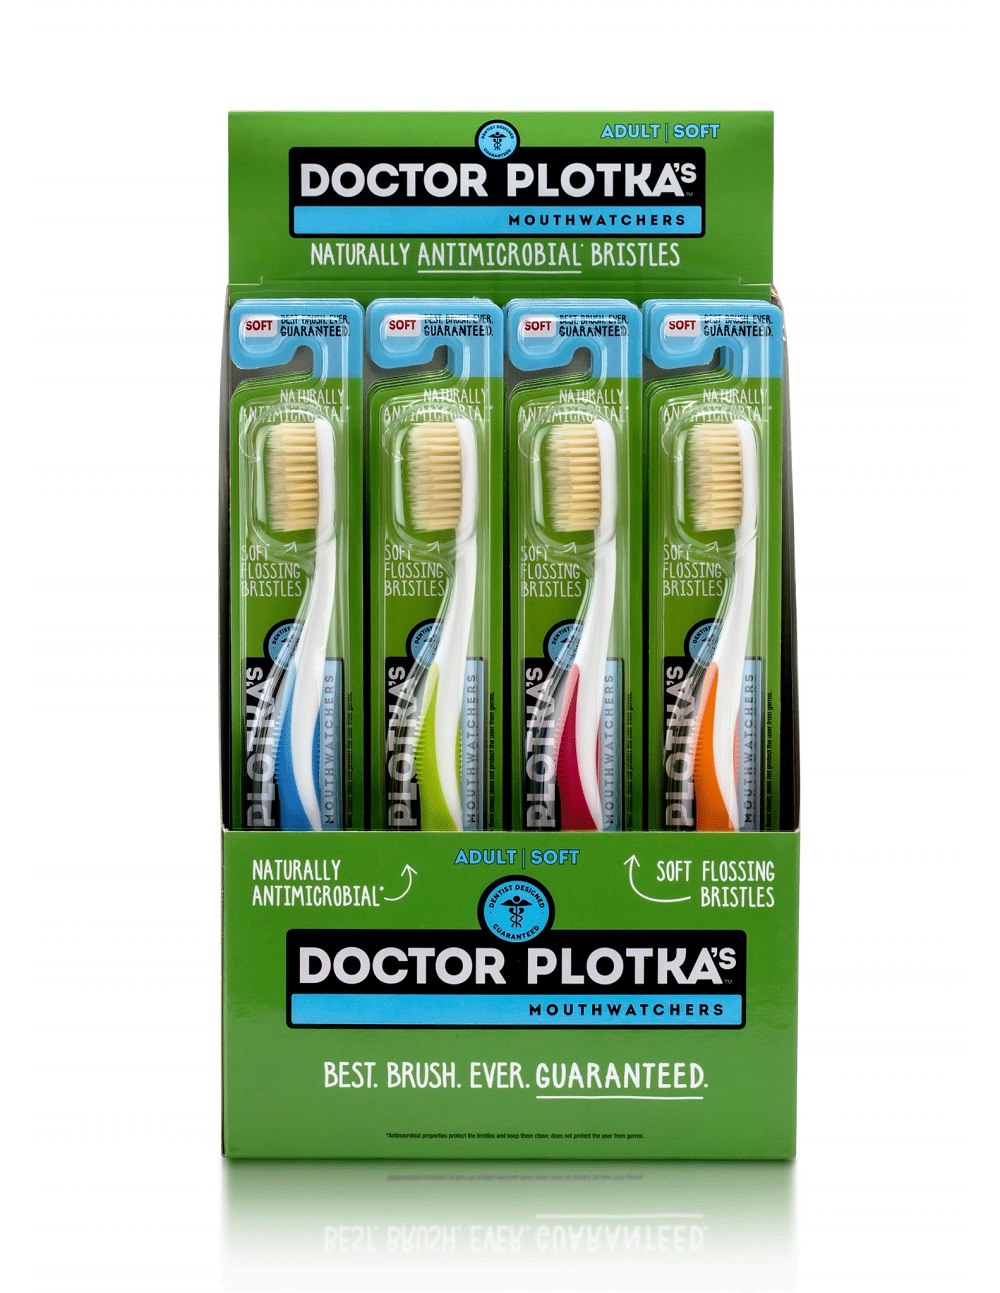 Doctor Plotka's Mouthwatchers Display - Blue, Green, Red and Orange